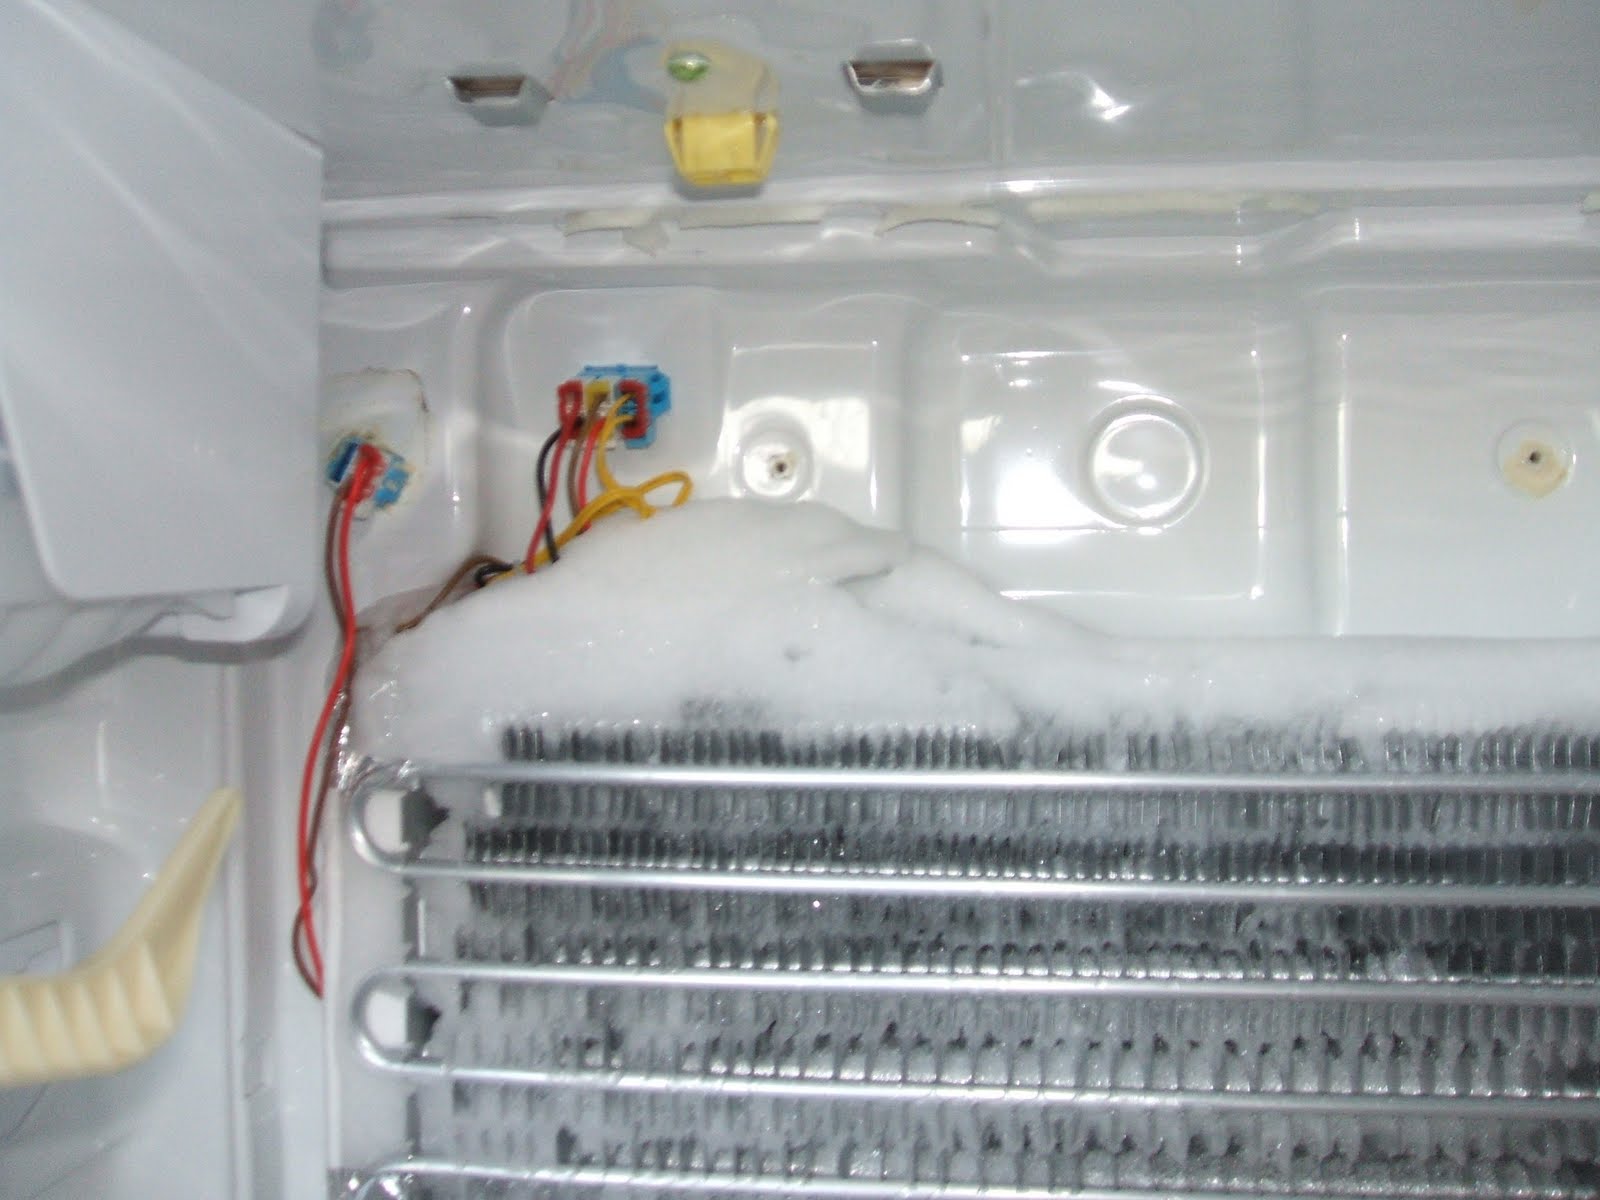 Lori's Travel & Other Adventures: Refrigerator Repairs - is my Samsung ...